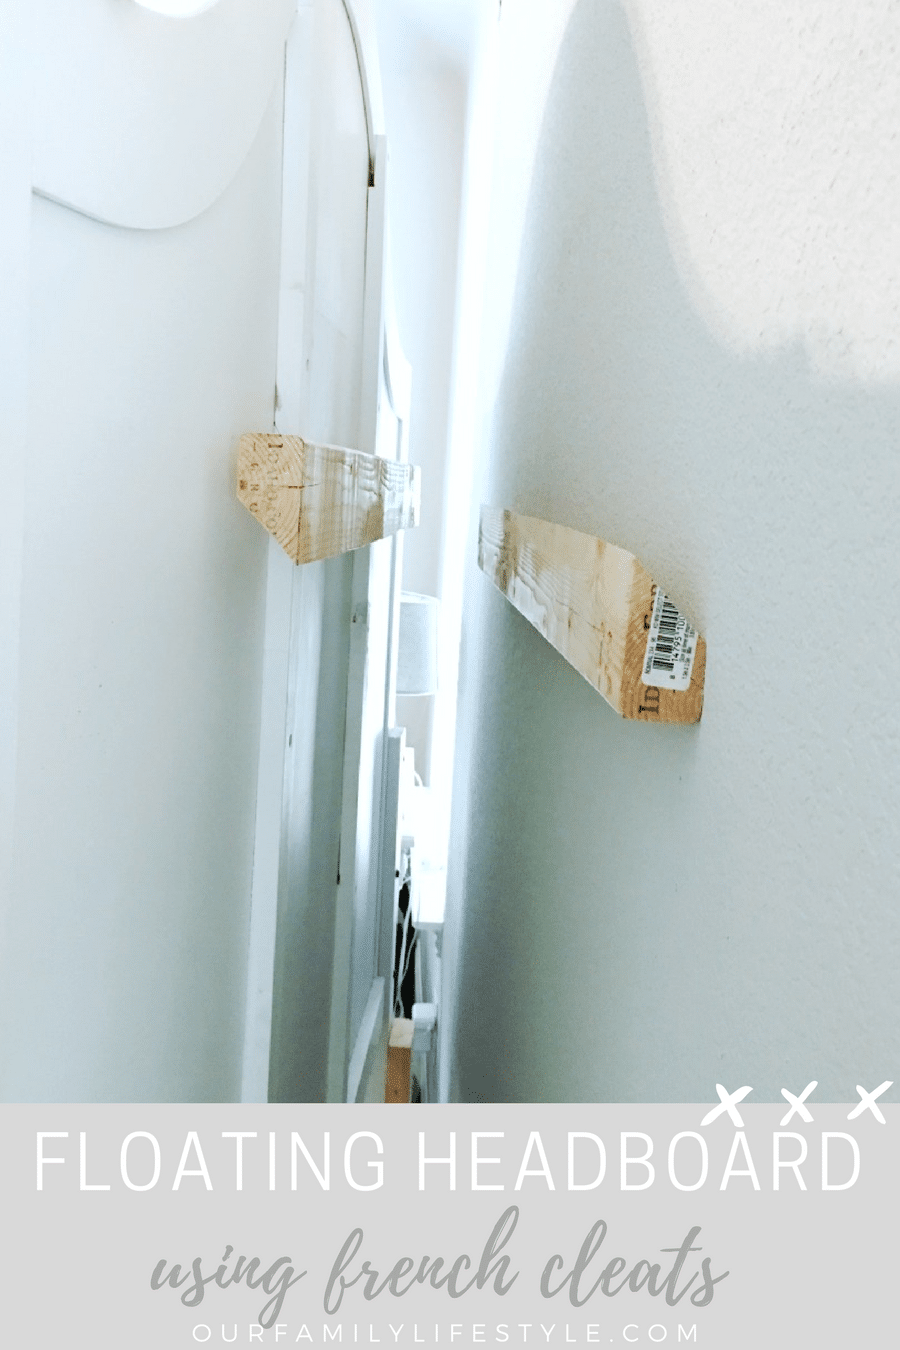 Headboard To The Wall Using French Cleats, How To Fix Headboard Wall